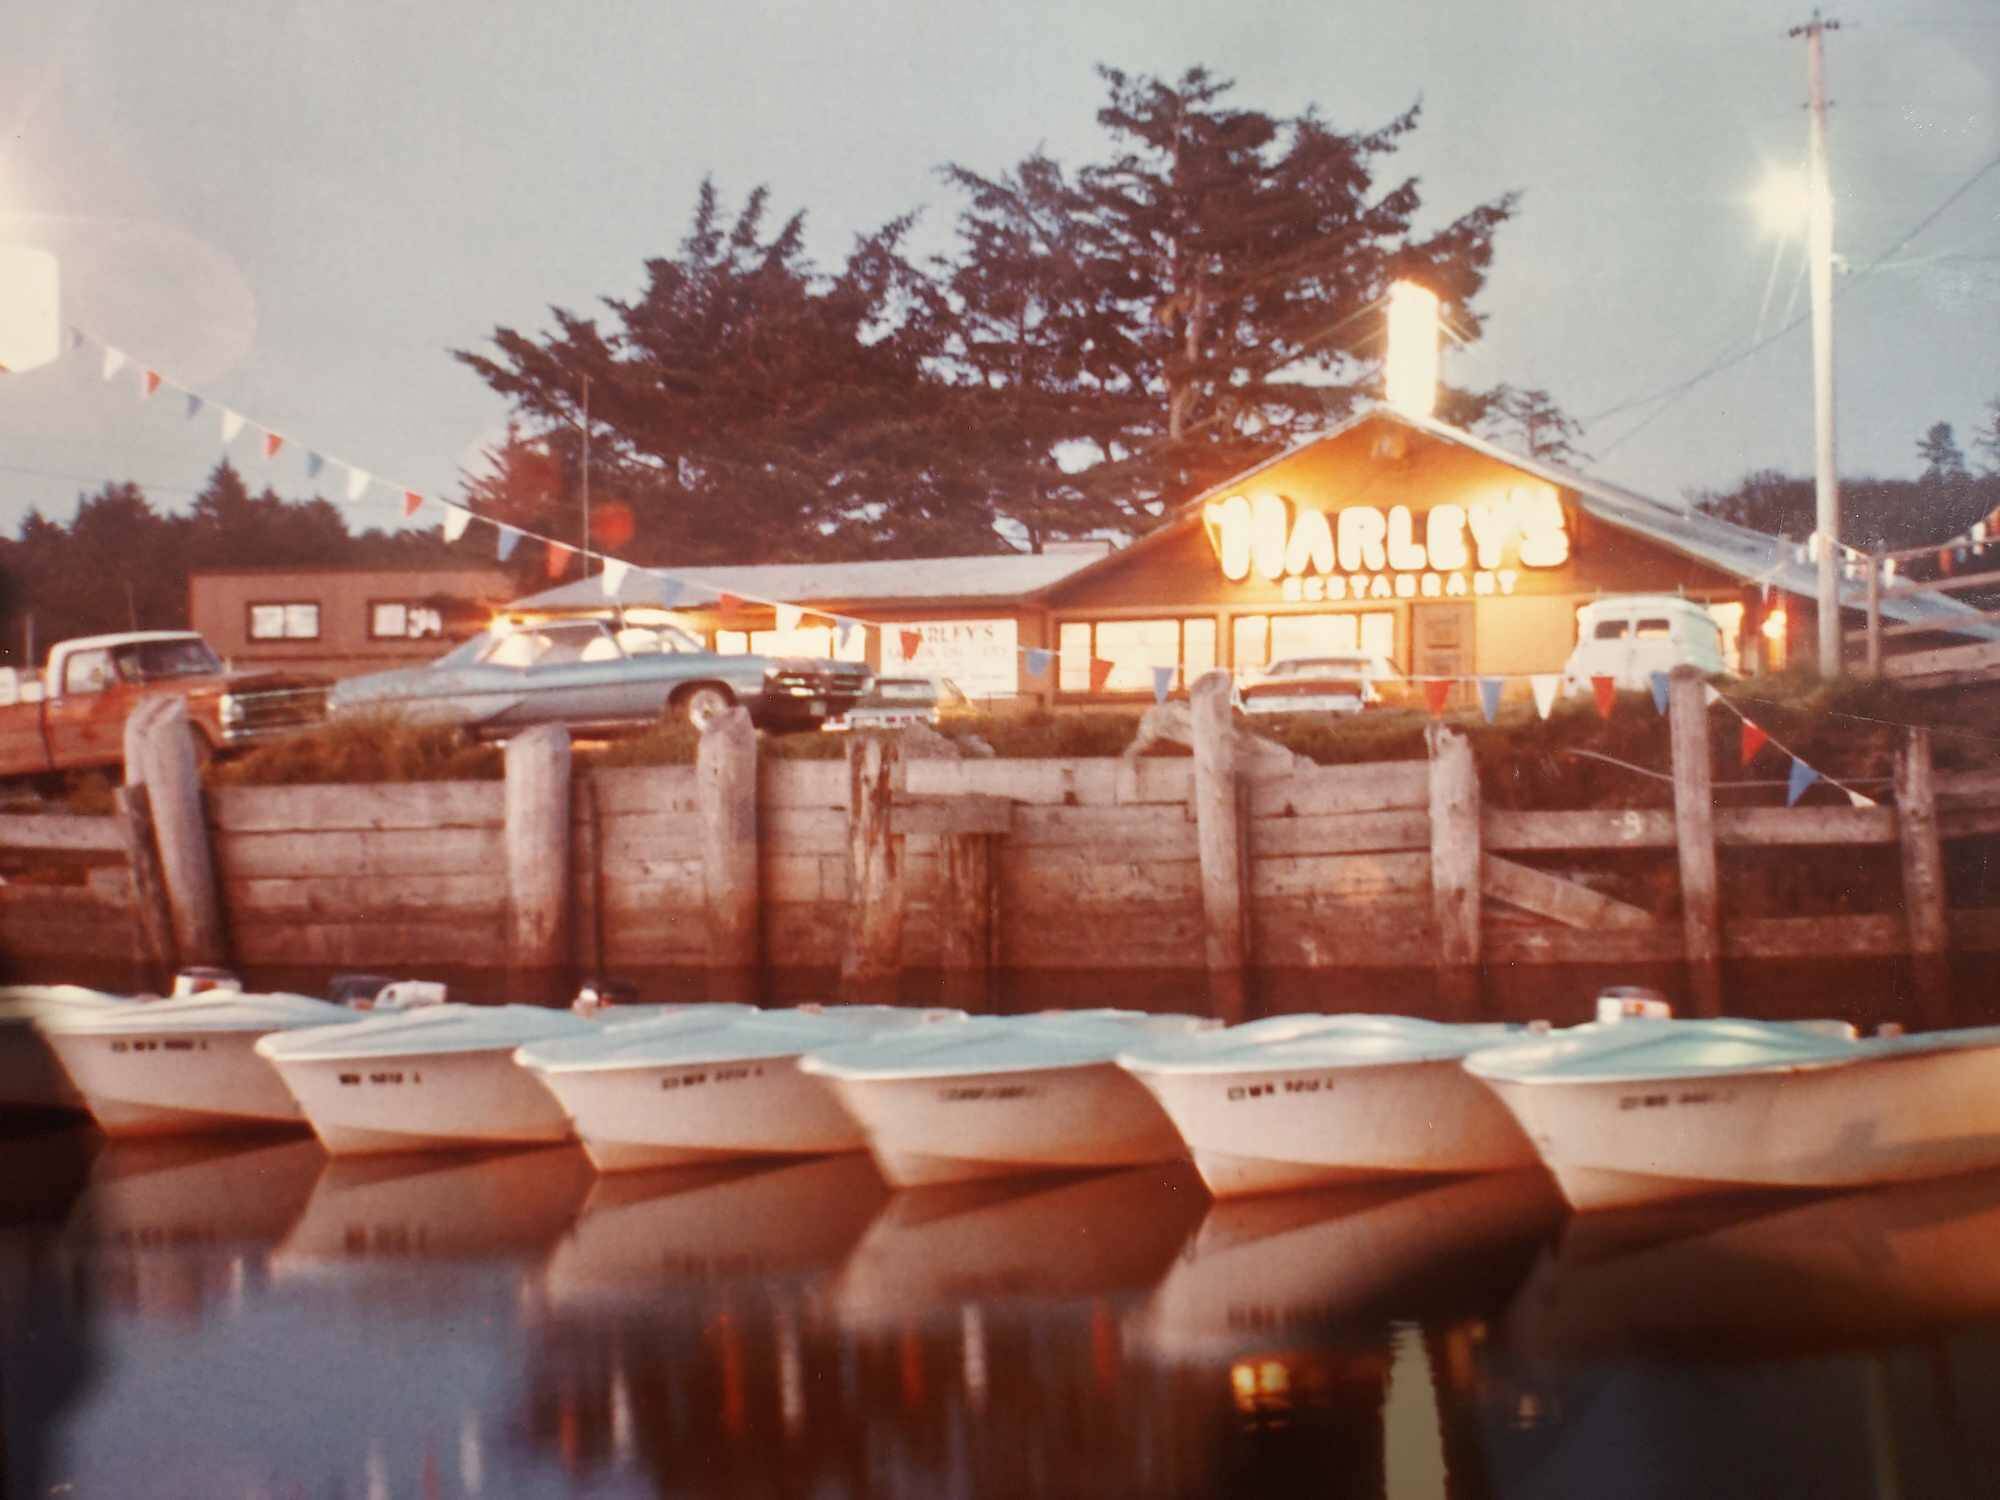 The West End Historical Society will re-live the heyday of Harley’s Resort, a former La Push business, when they view a 30-minute promotional film from the early 1960s at their next meeting on Tuesday, March 19, at noon, at the Congregational Church. The film was discovered in an attic in Port Angeles about 15 years ago and transferred to DVD. The film shows lots of fishing action and even a few familiar faces. The public and new members are always welcome! Caudill family photo